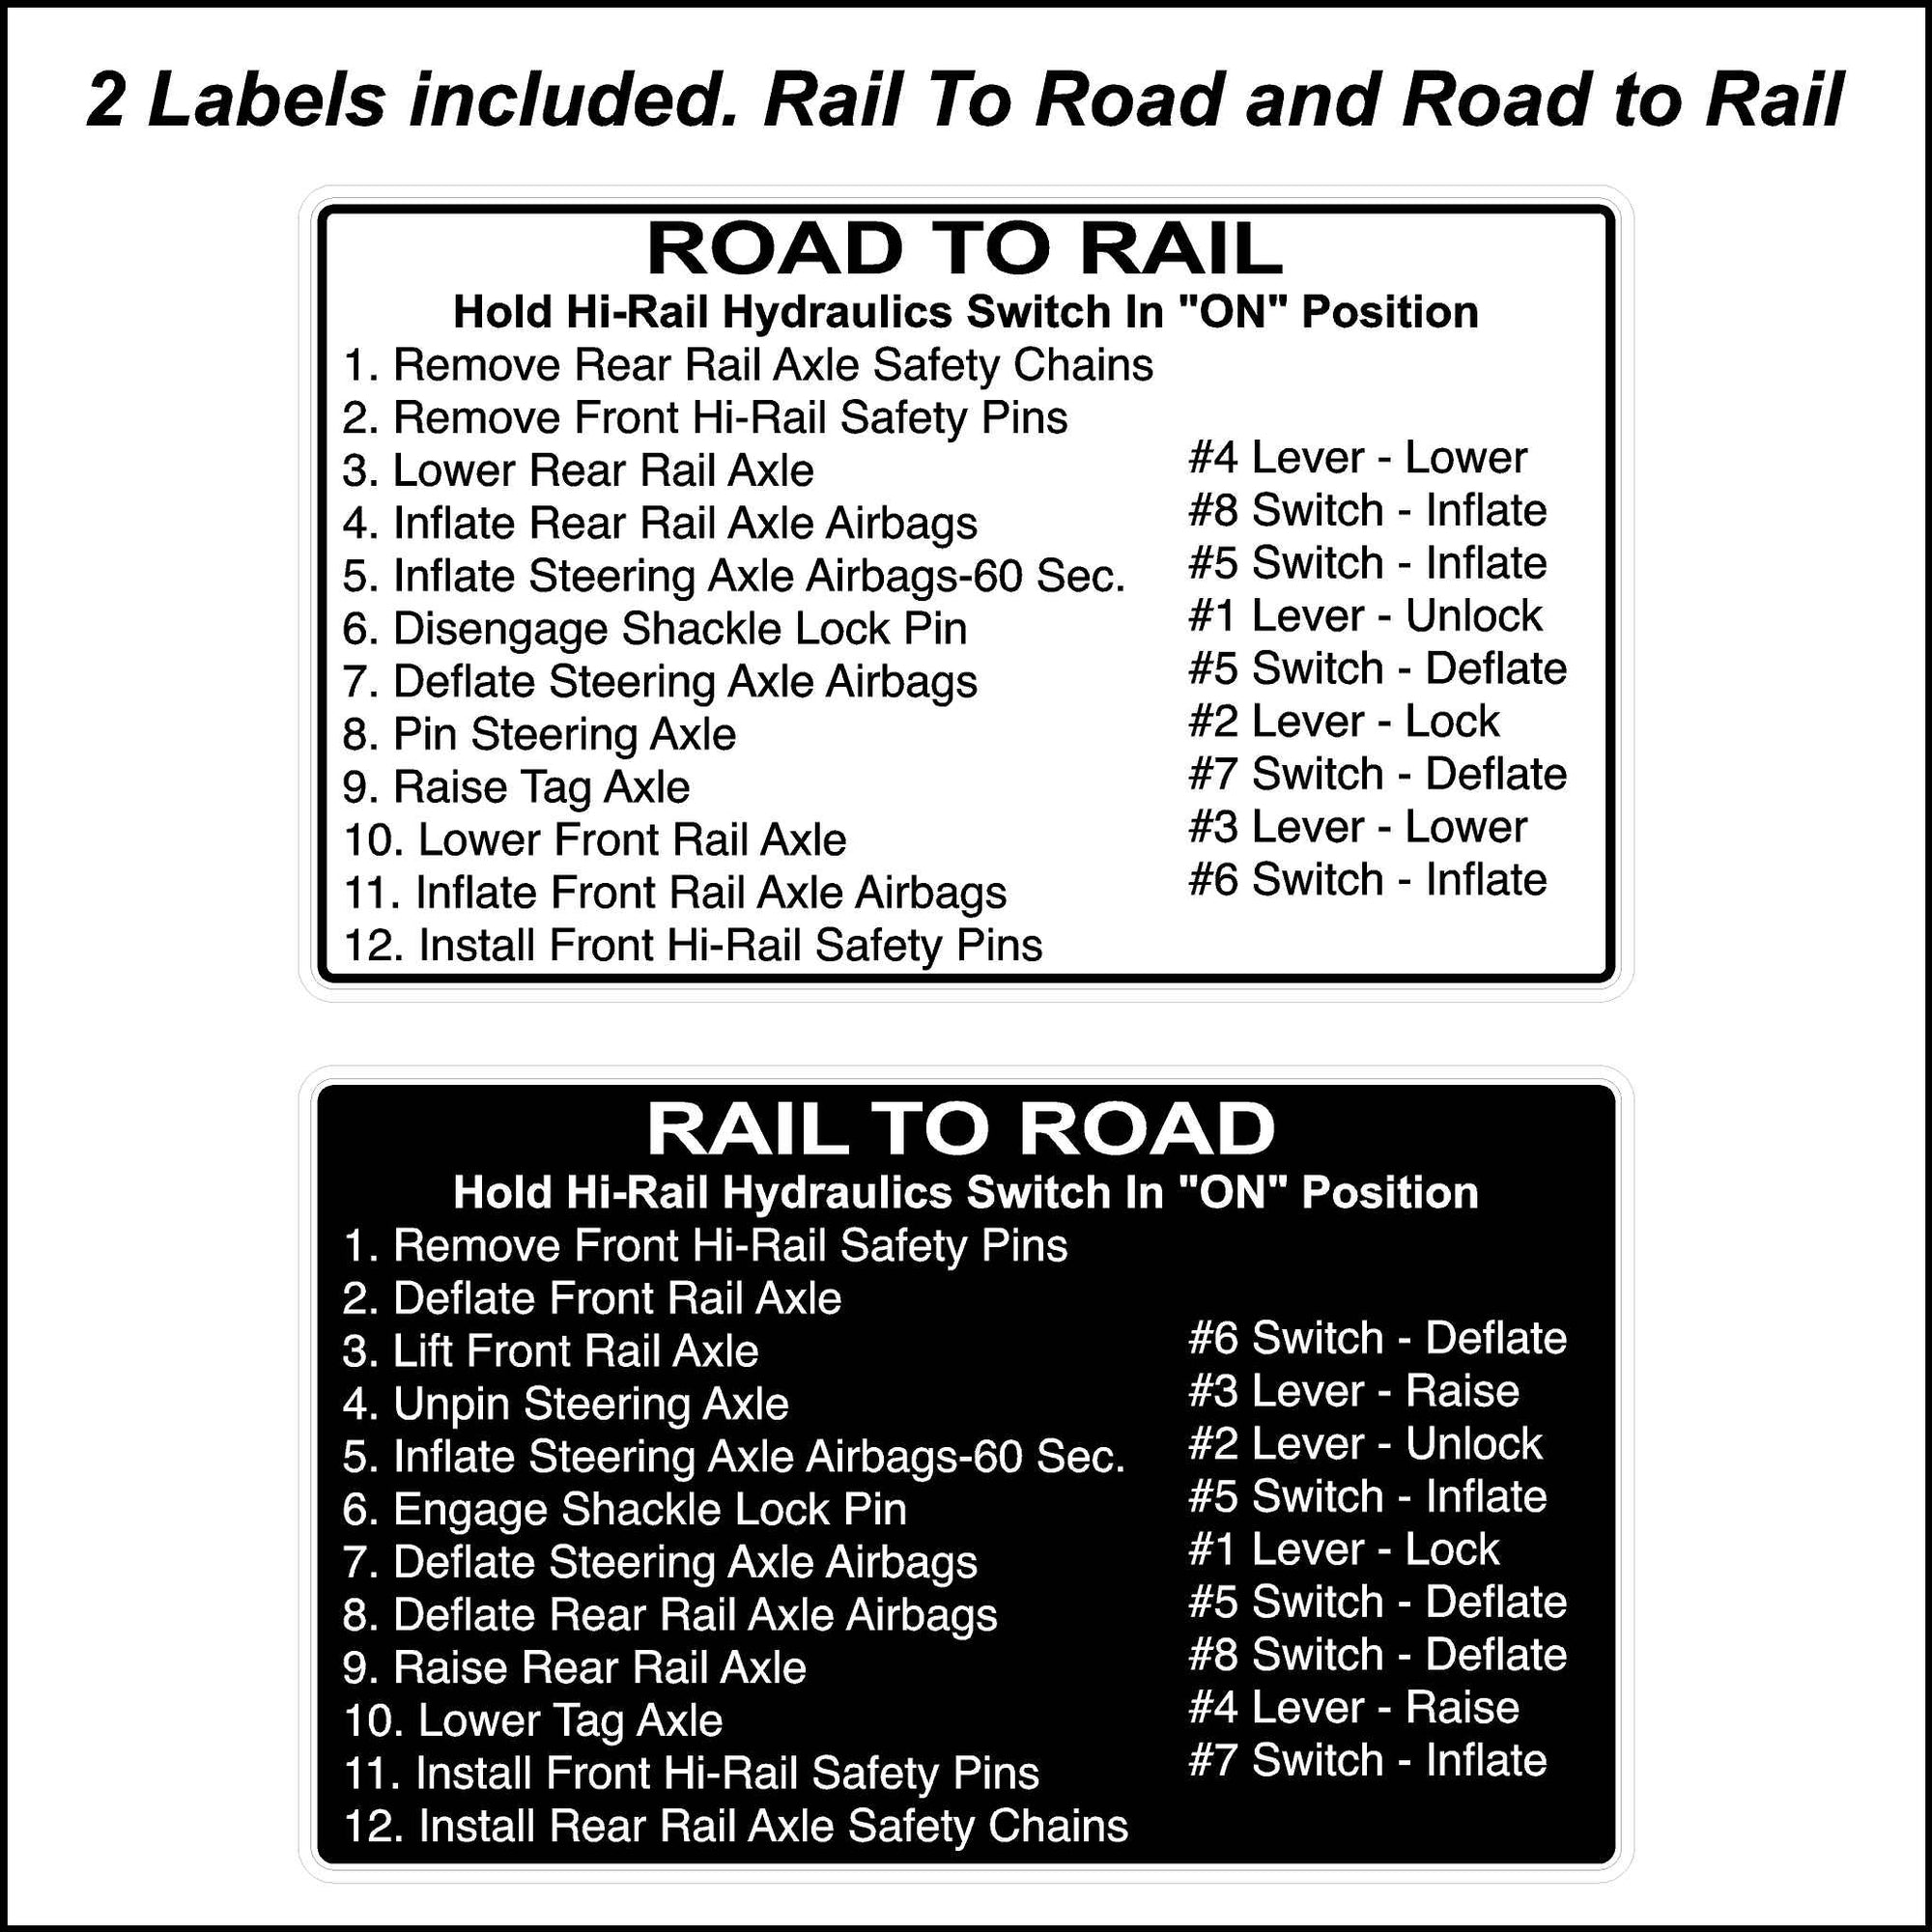 Road To Rail safety Sticker Printed with. Hold Hi-Rail Hydraulics Switch In "ON" Position 1. Remove Rear Rail Axle Safety Chains 2. Remove Front Hi-Rail Safety Pins 3. Lower Rear Rail Axle 4. Inflate Rear Rail Axle Airbags 5. Inflate Steering Axle Airbags-60 Sec. 6. Disengage Shackle Lock Pin 7. Deflate Steering Axle Airbags 8. Pin Steering Axle 9. Raise Tag Axle 10. Lower Front Rail Axle 11. Inflate Front Rail Axle Airbags 12. Install Front Hi-Rail Safety Pins.